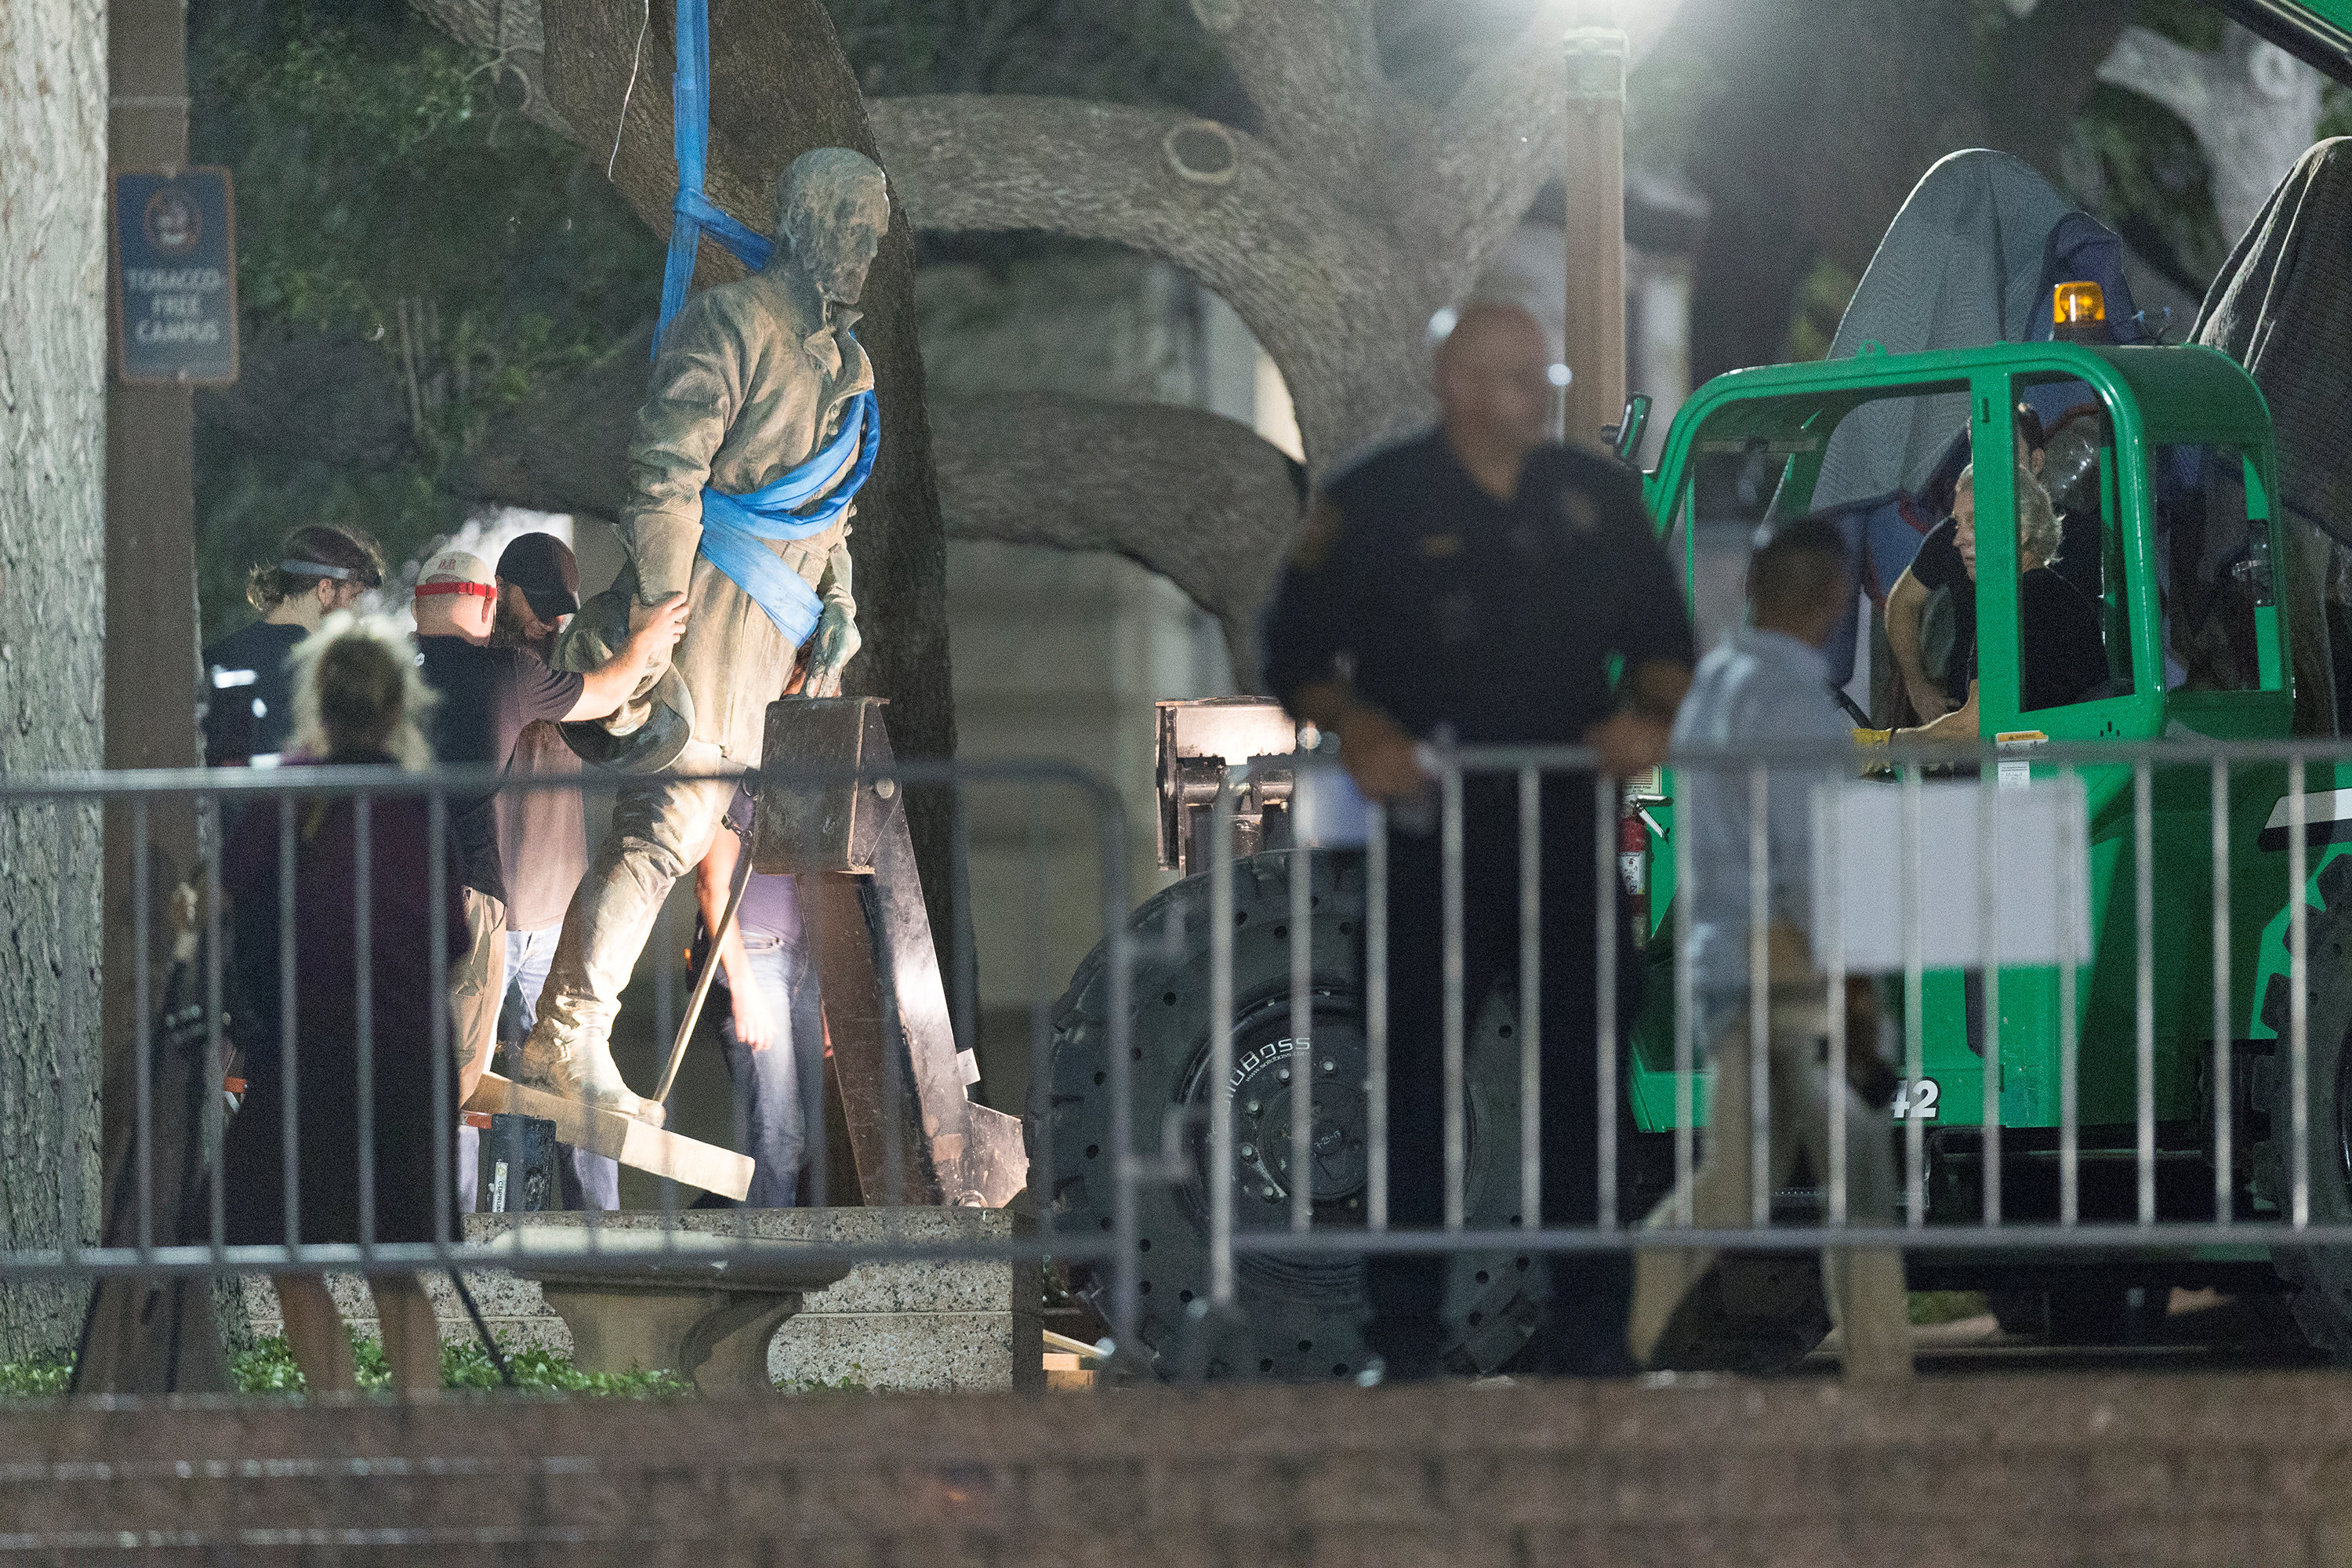 In pictures: Confederate heroes statues removed from US university grounds